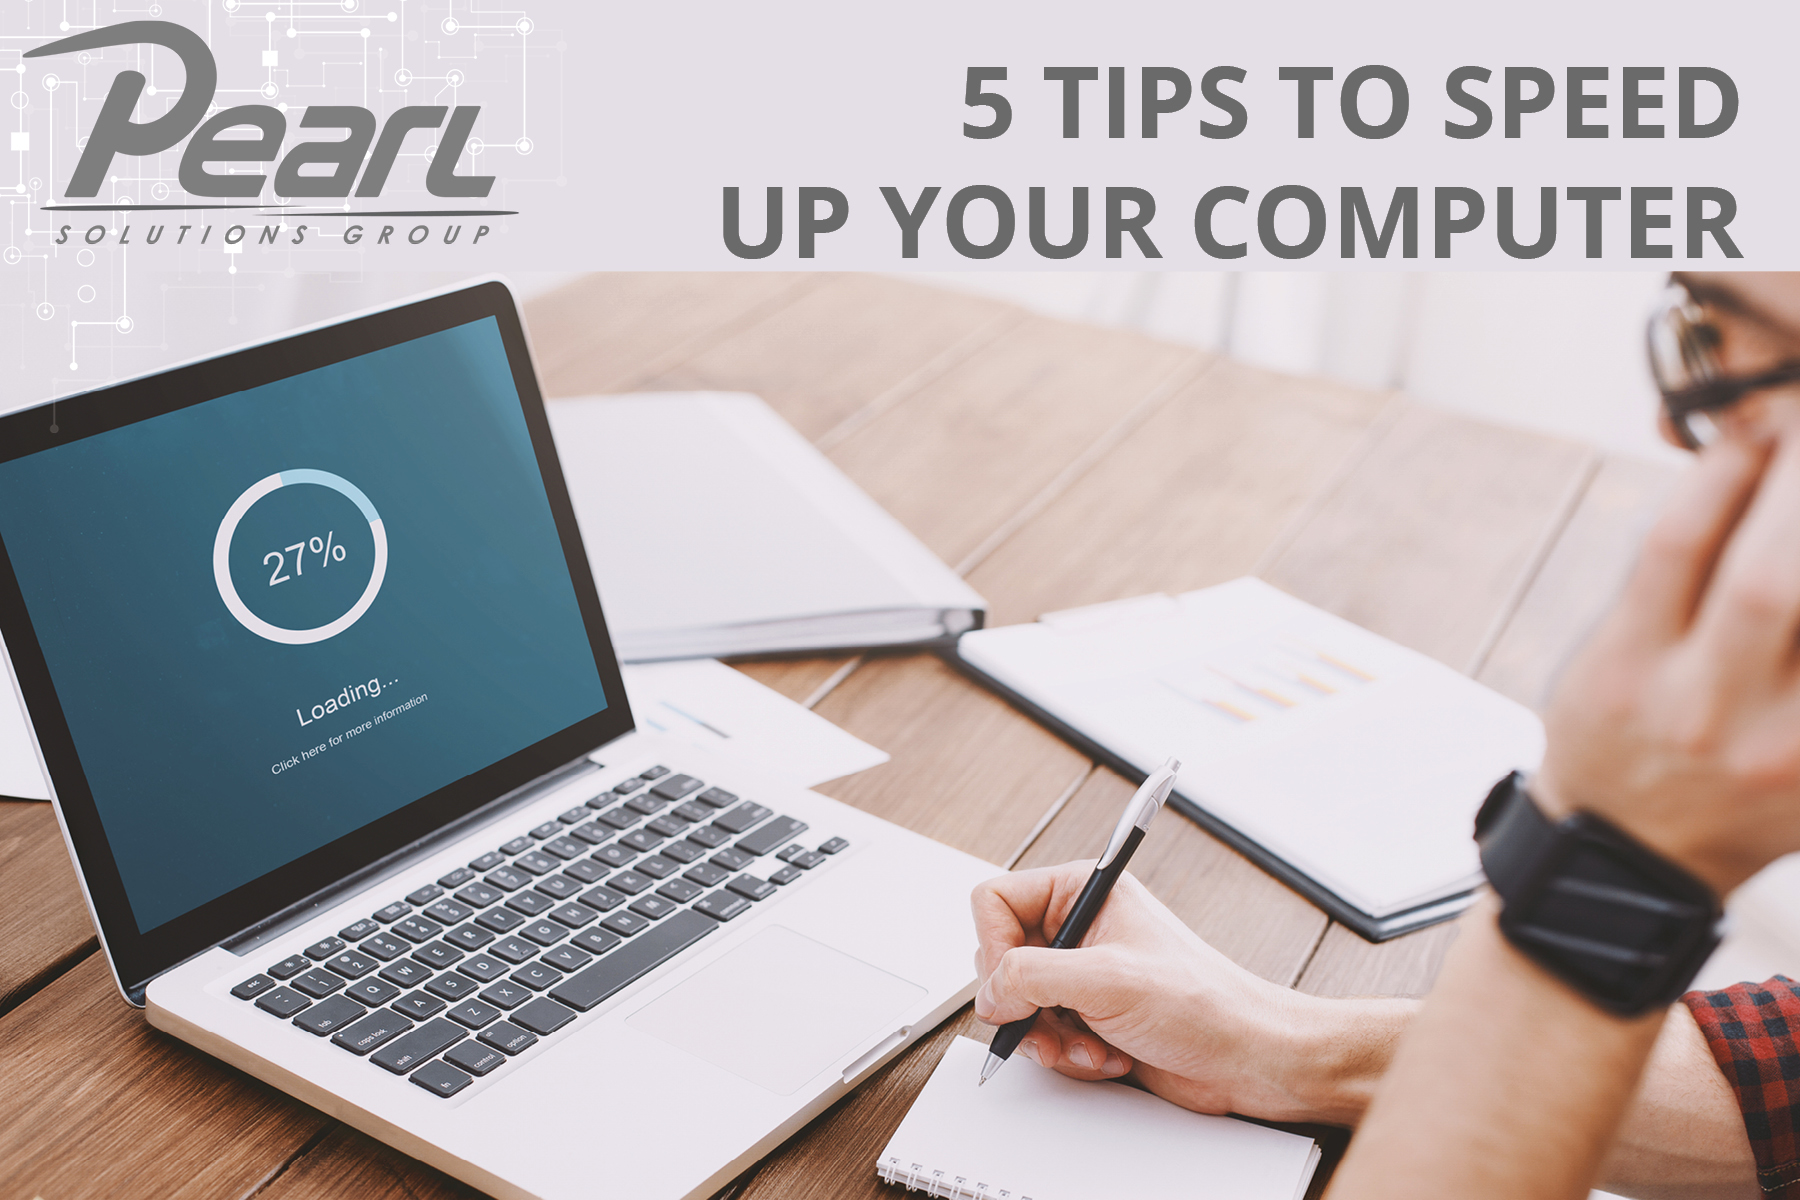 5 Tips to Speed Up Your Computer